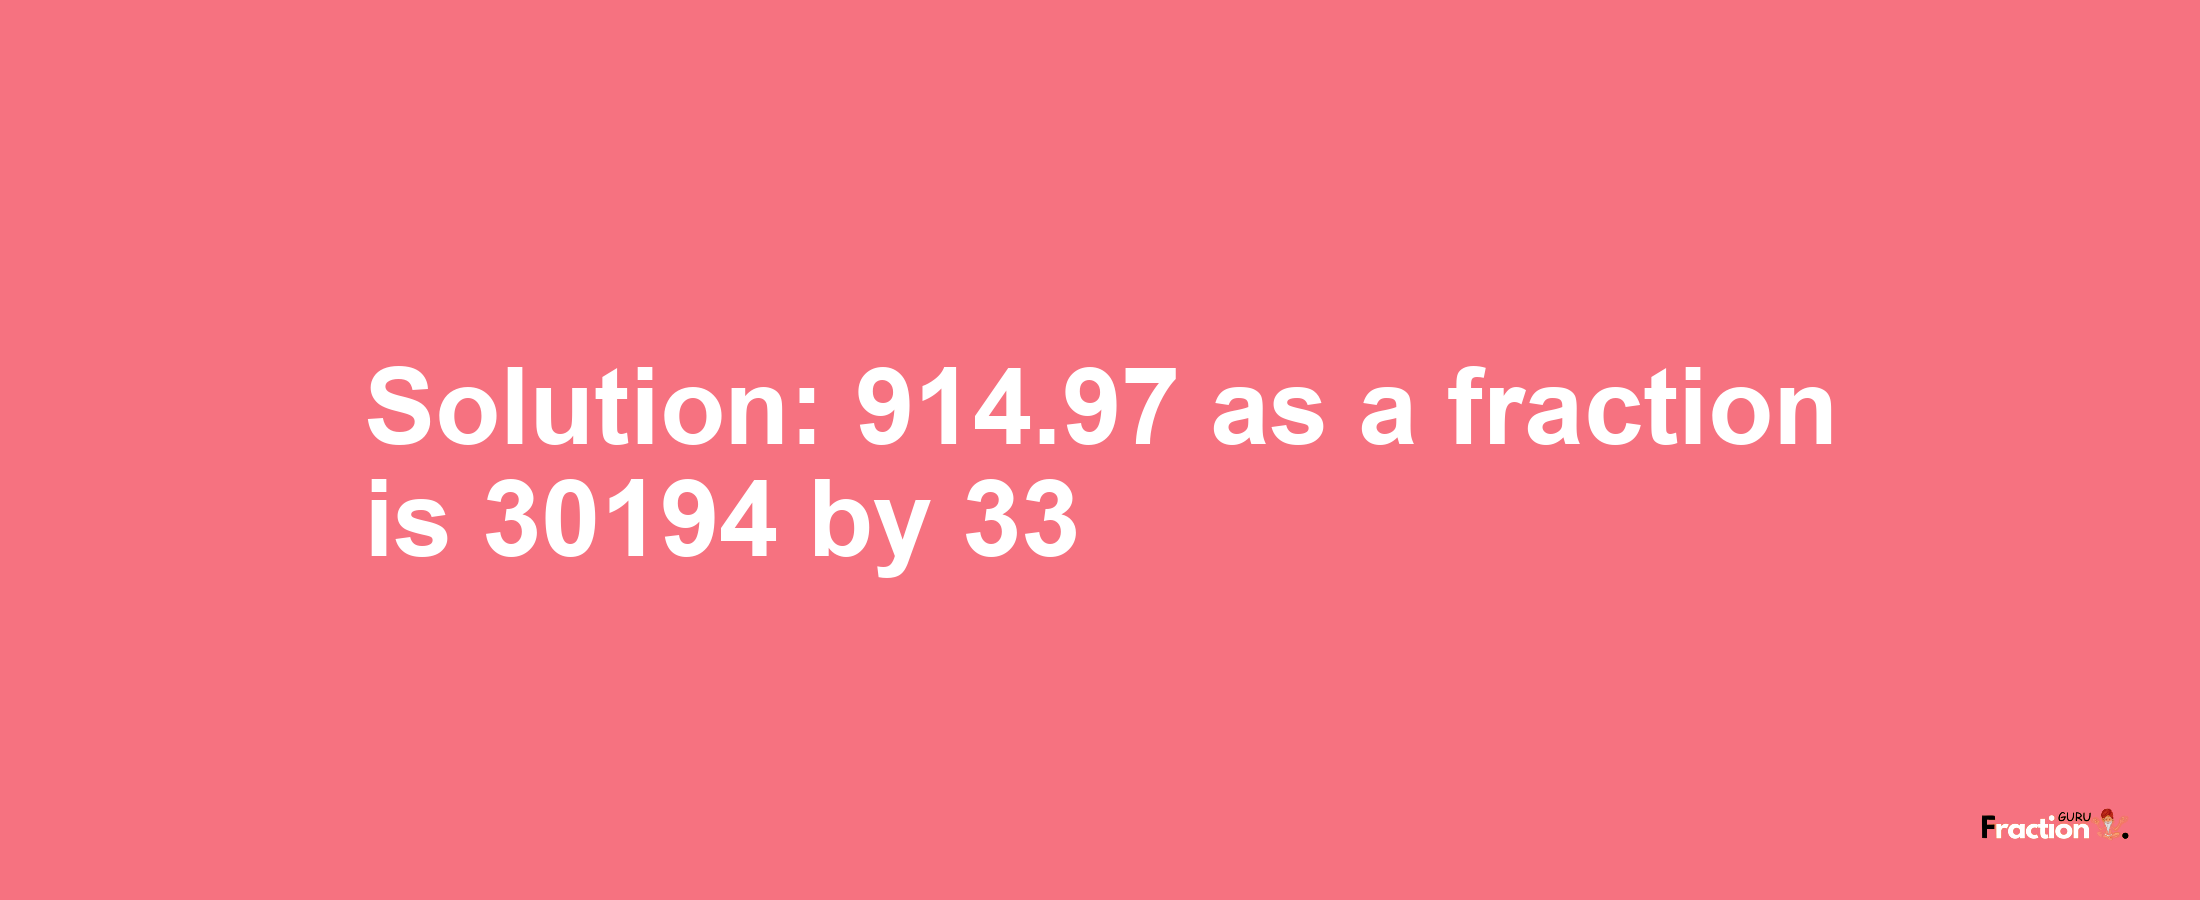 Solution:914.97 as a fraction is 30194/33